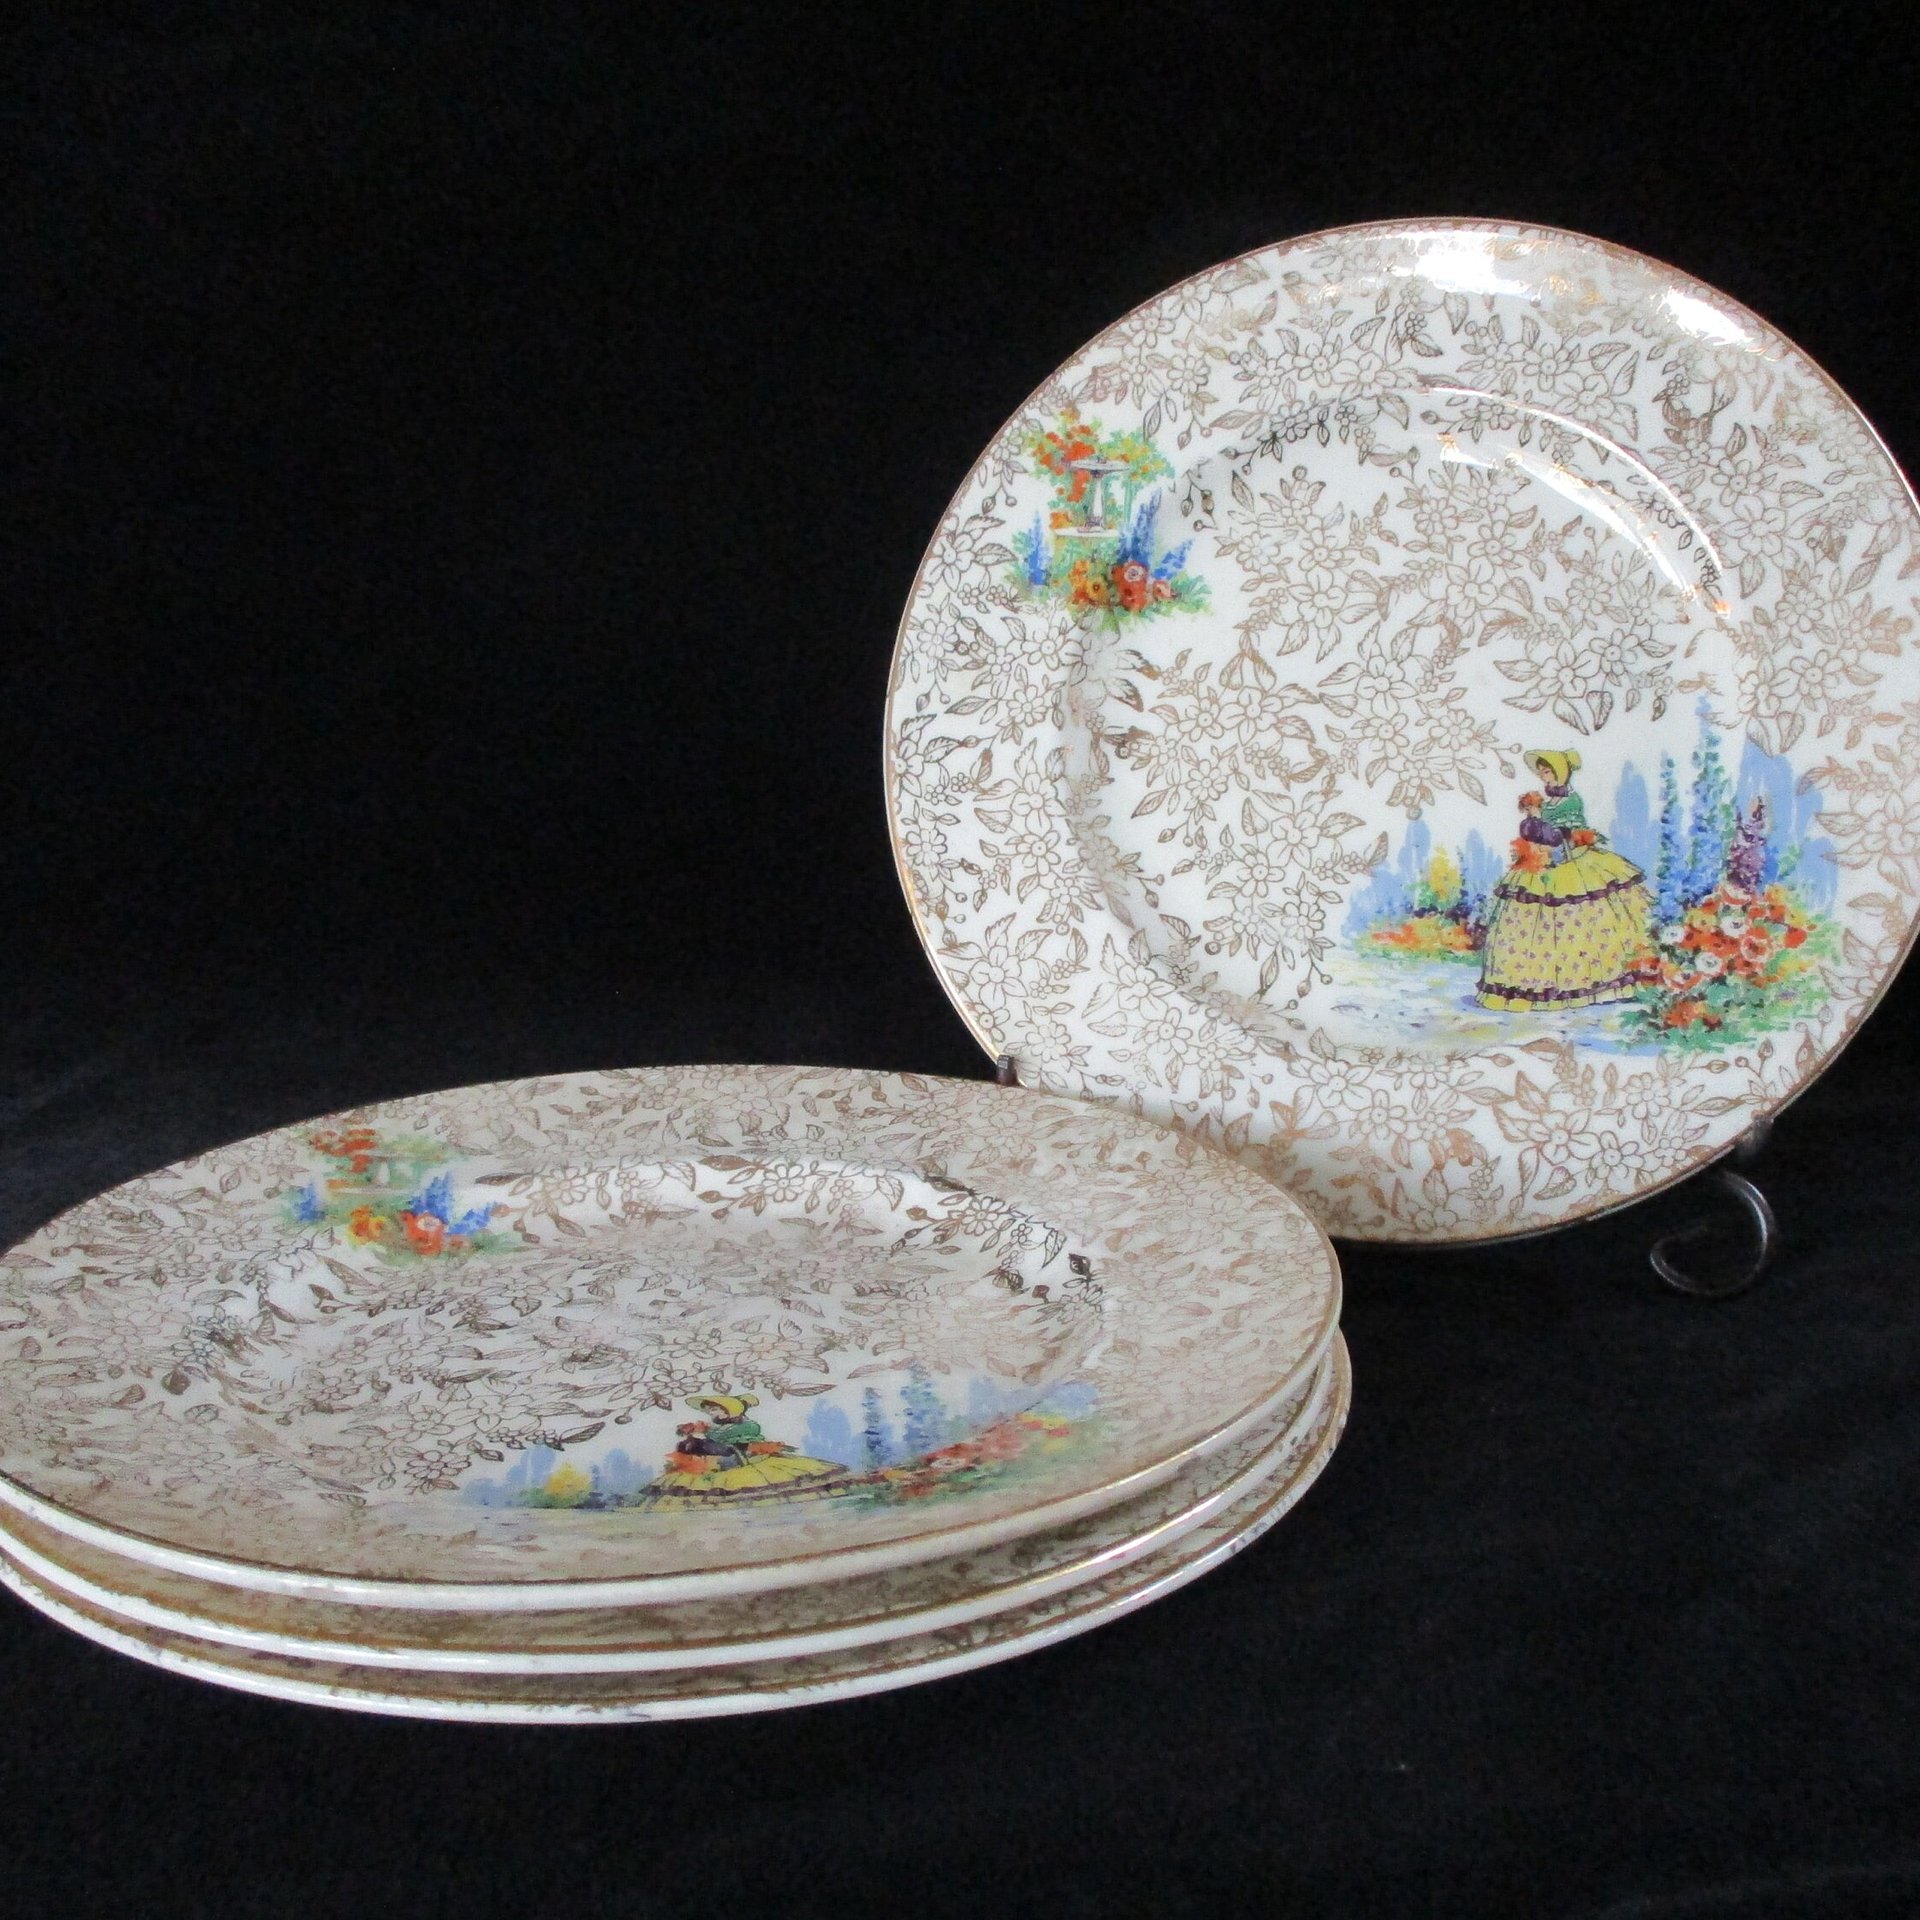 Victorian Lady Bread Plates, Empire England, Spring Florals with Gold Borders and Gold Flowers, Tablescaping, Set of 4